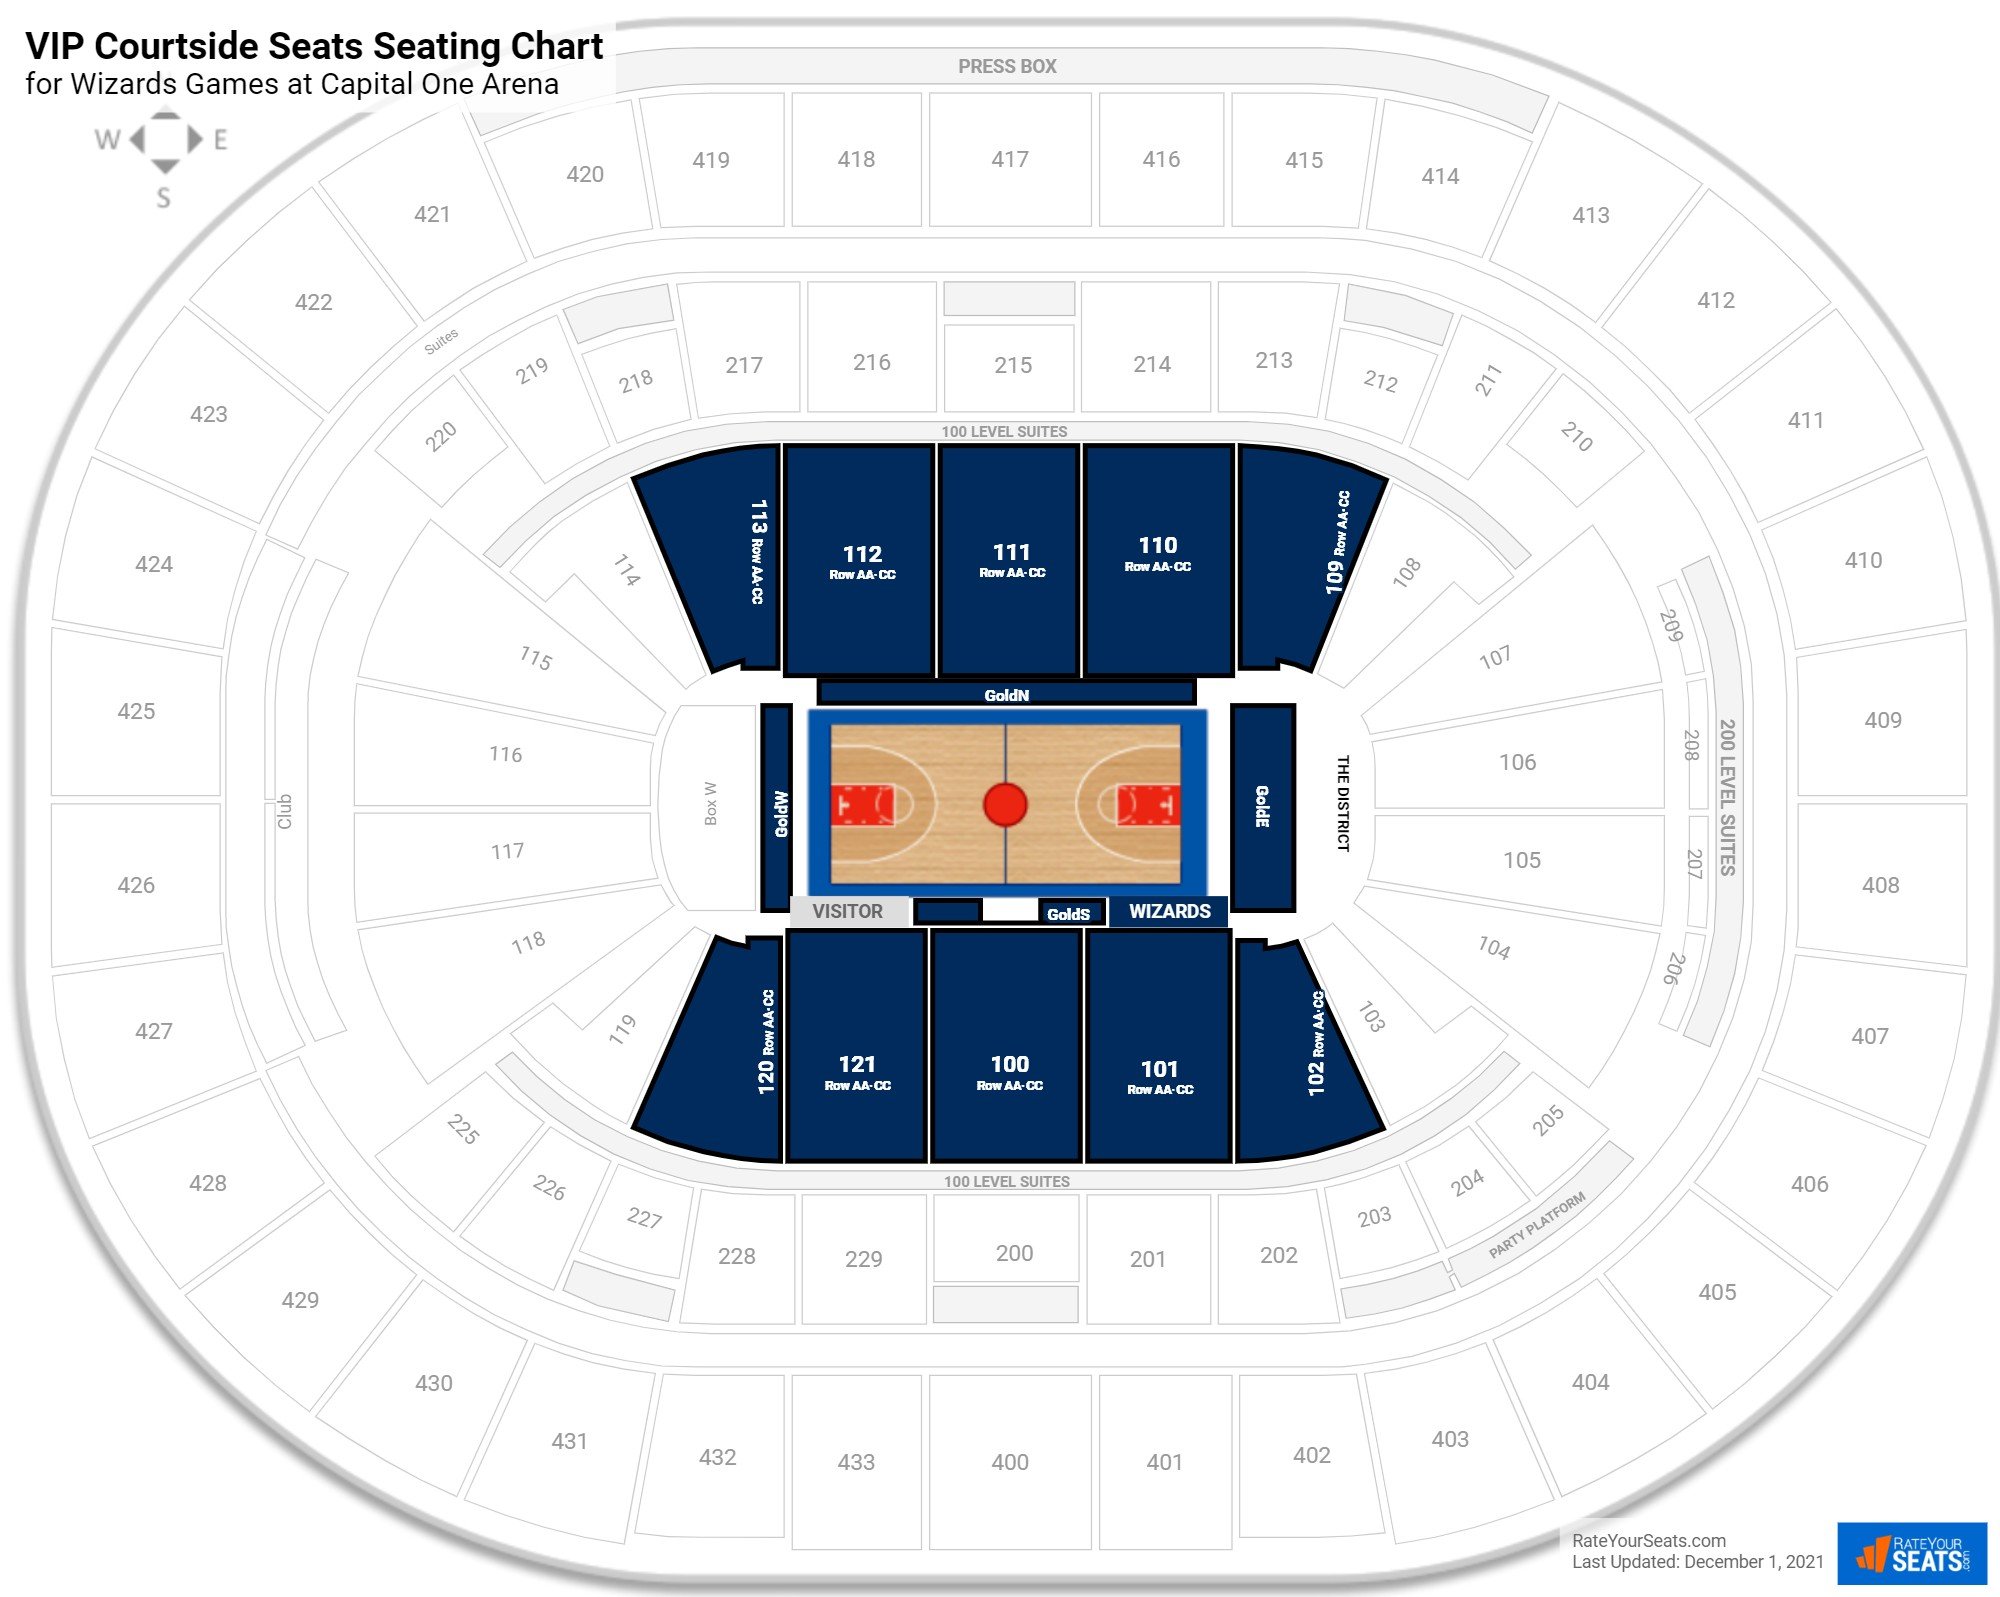 Wizards VIP Courtside Seats Seating Chart at Capital One Arena